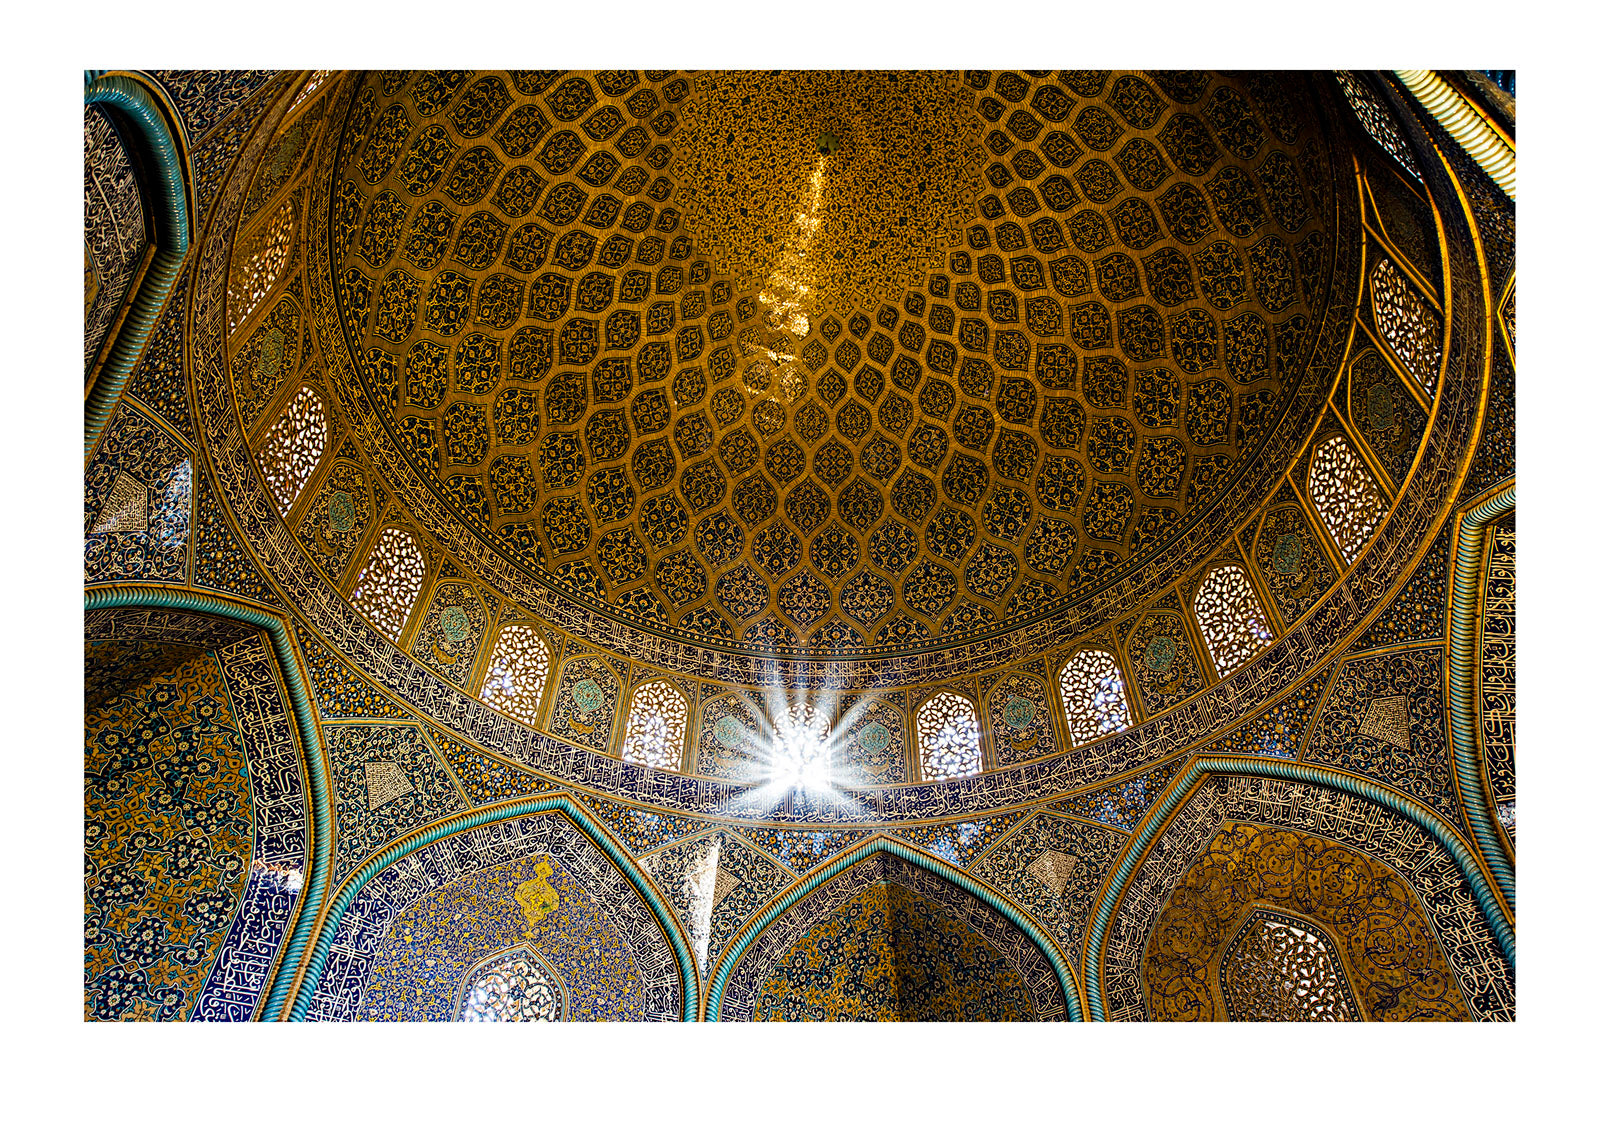 The beautiful and intricate tiled patterns on the dome of the Sheikh Lotfollah Mosque. Sheikh Lotfollah Mosque, Naqsh-e Jahan Square, Isfahan, Isfahan Province, Islamic Republic of Iran. 
